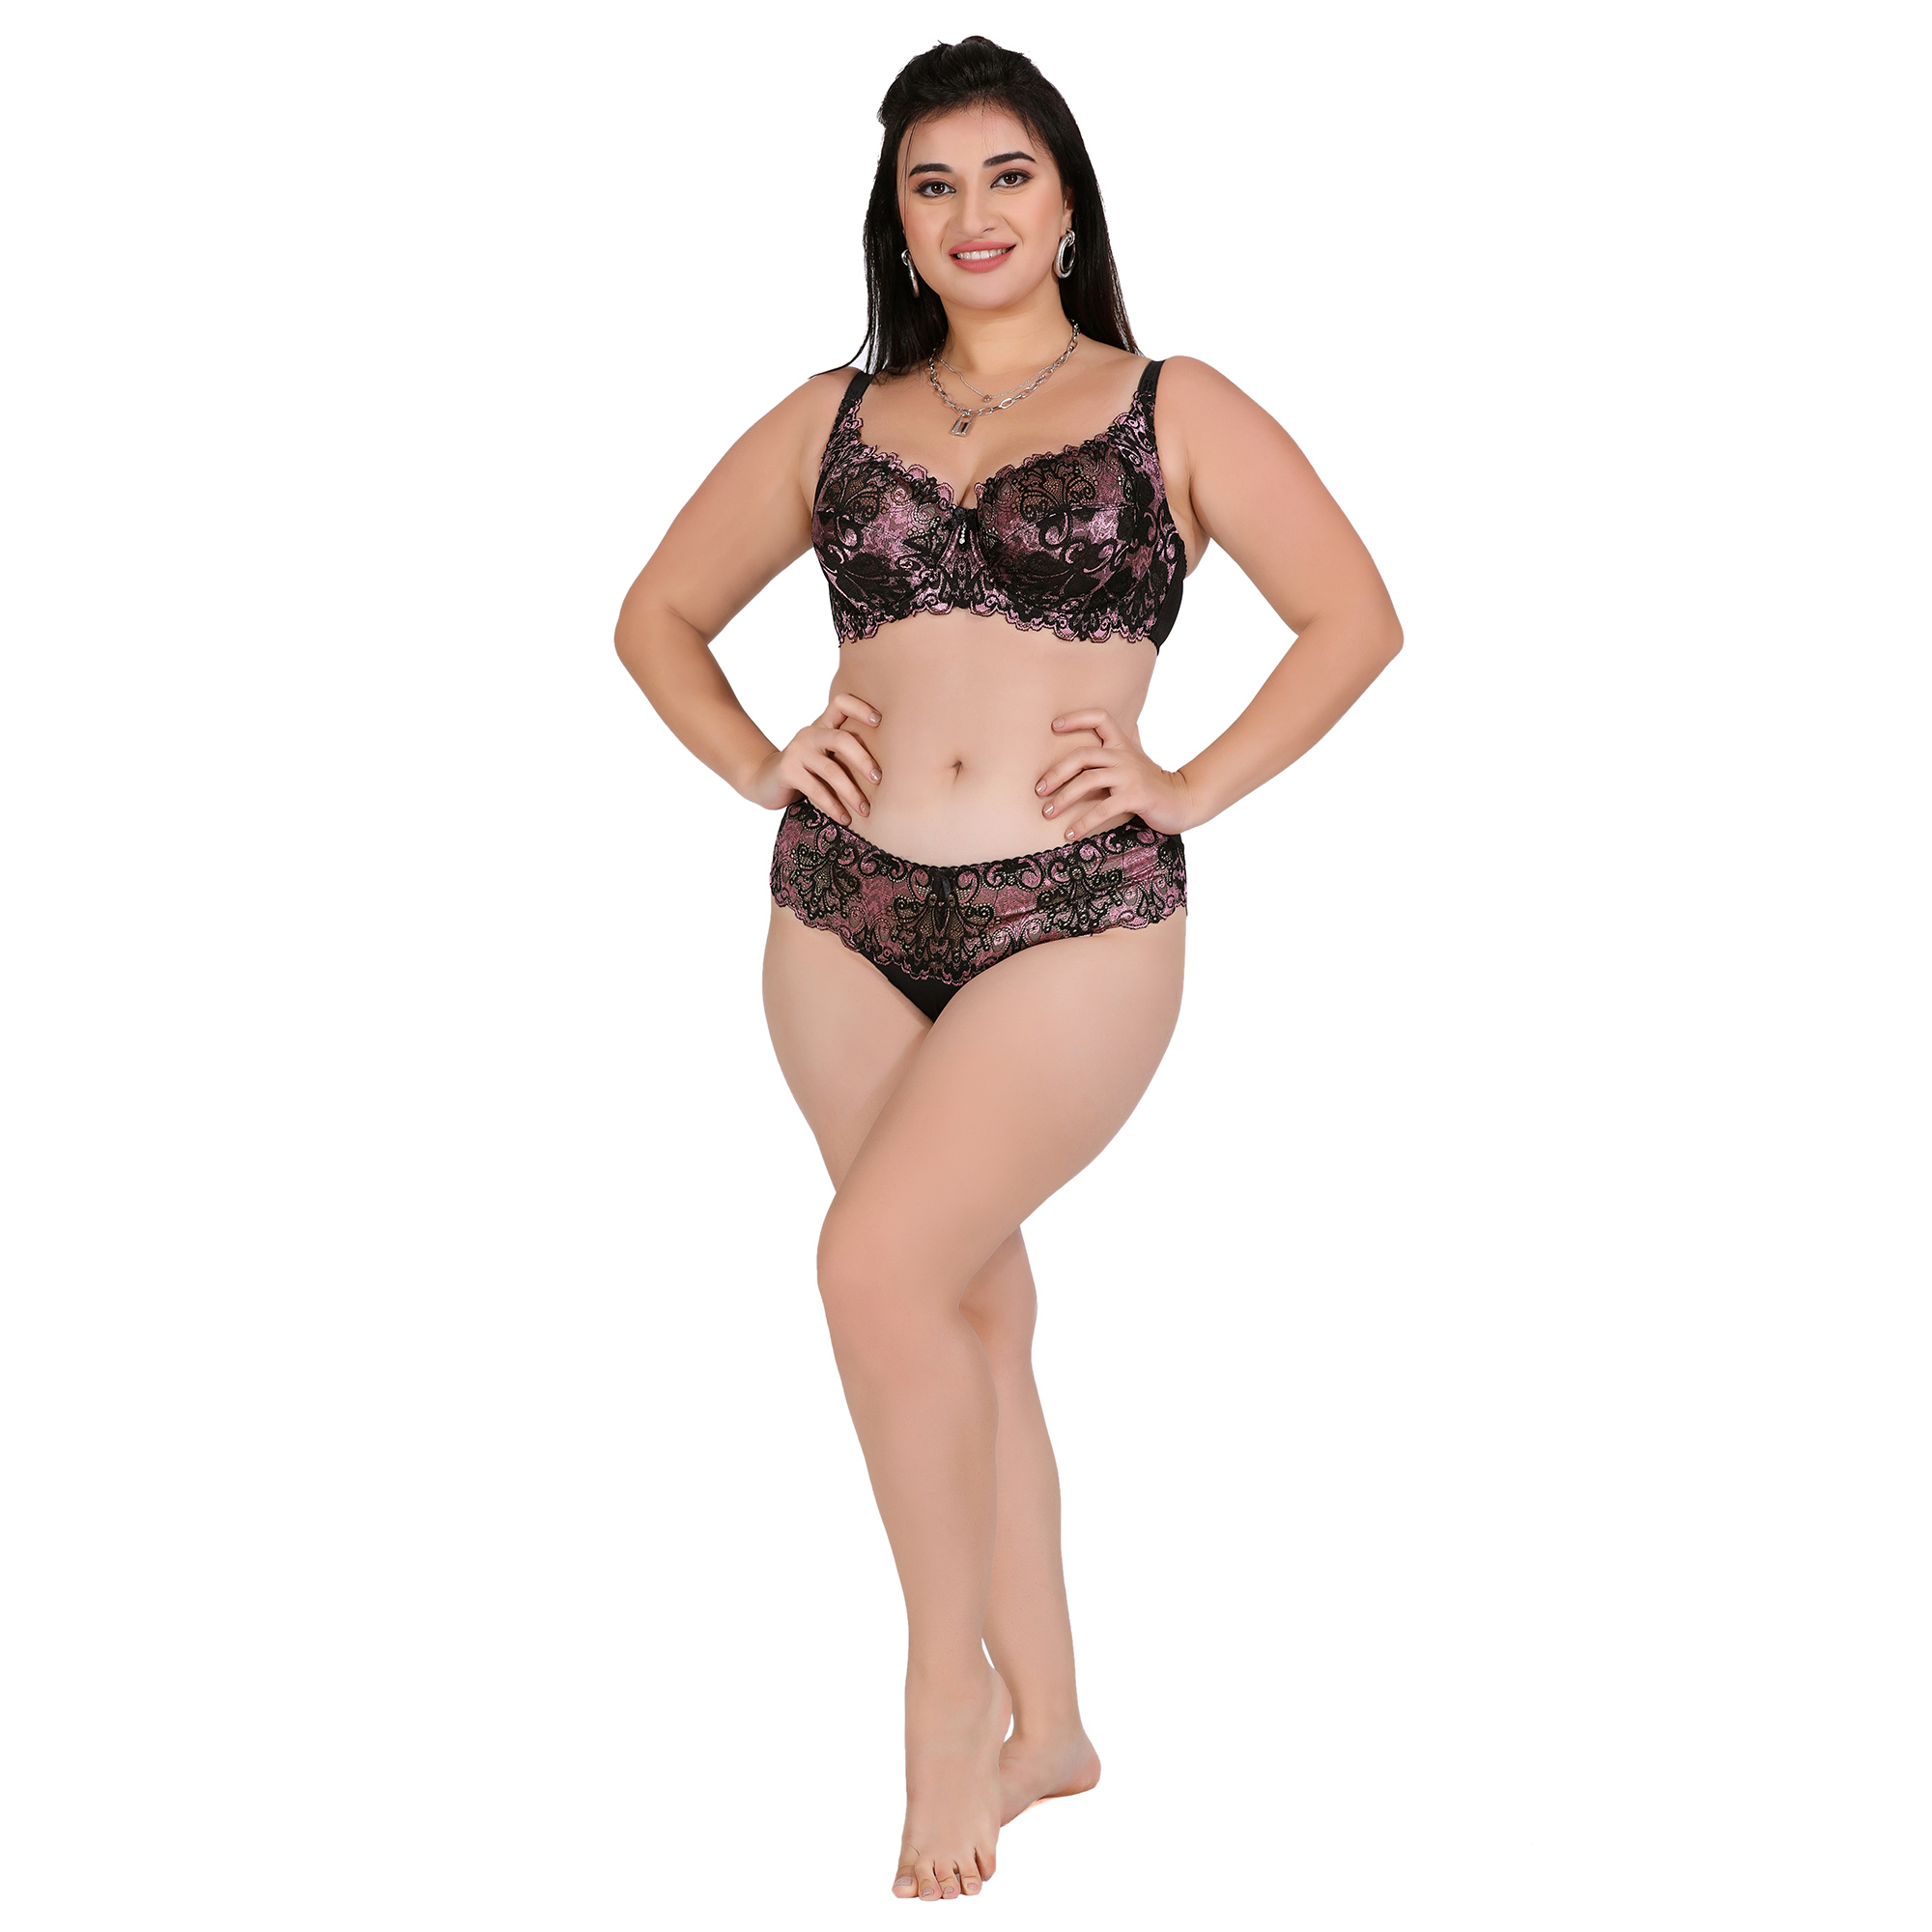 Women After Delivery Panty For Women Bikini Set C String Panty For Women  Lingerie Set Bra at Rs 45/piece, Bra and Brief Sets in New Delhi